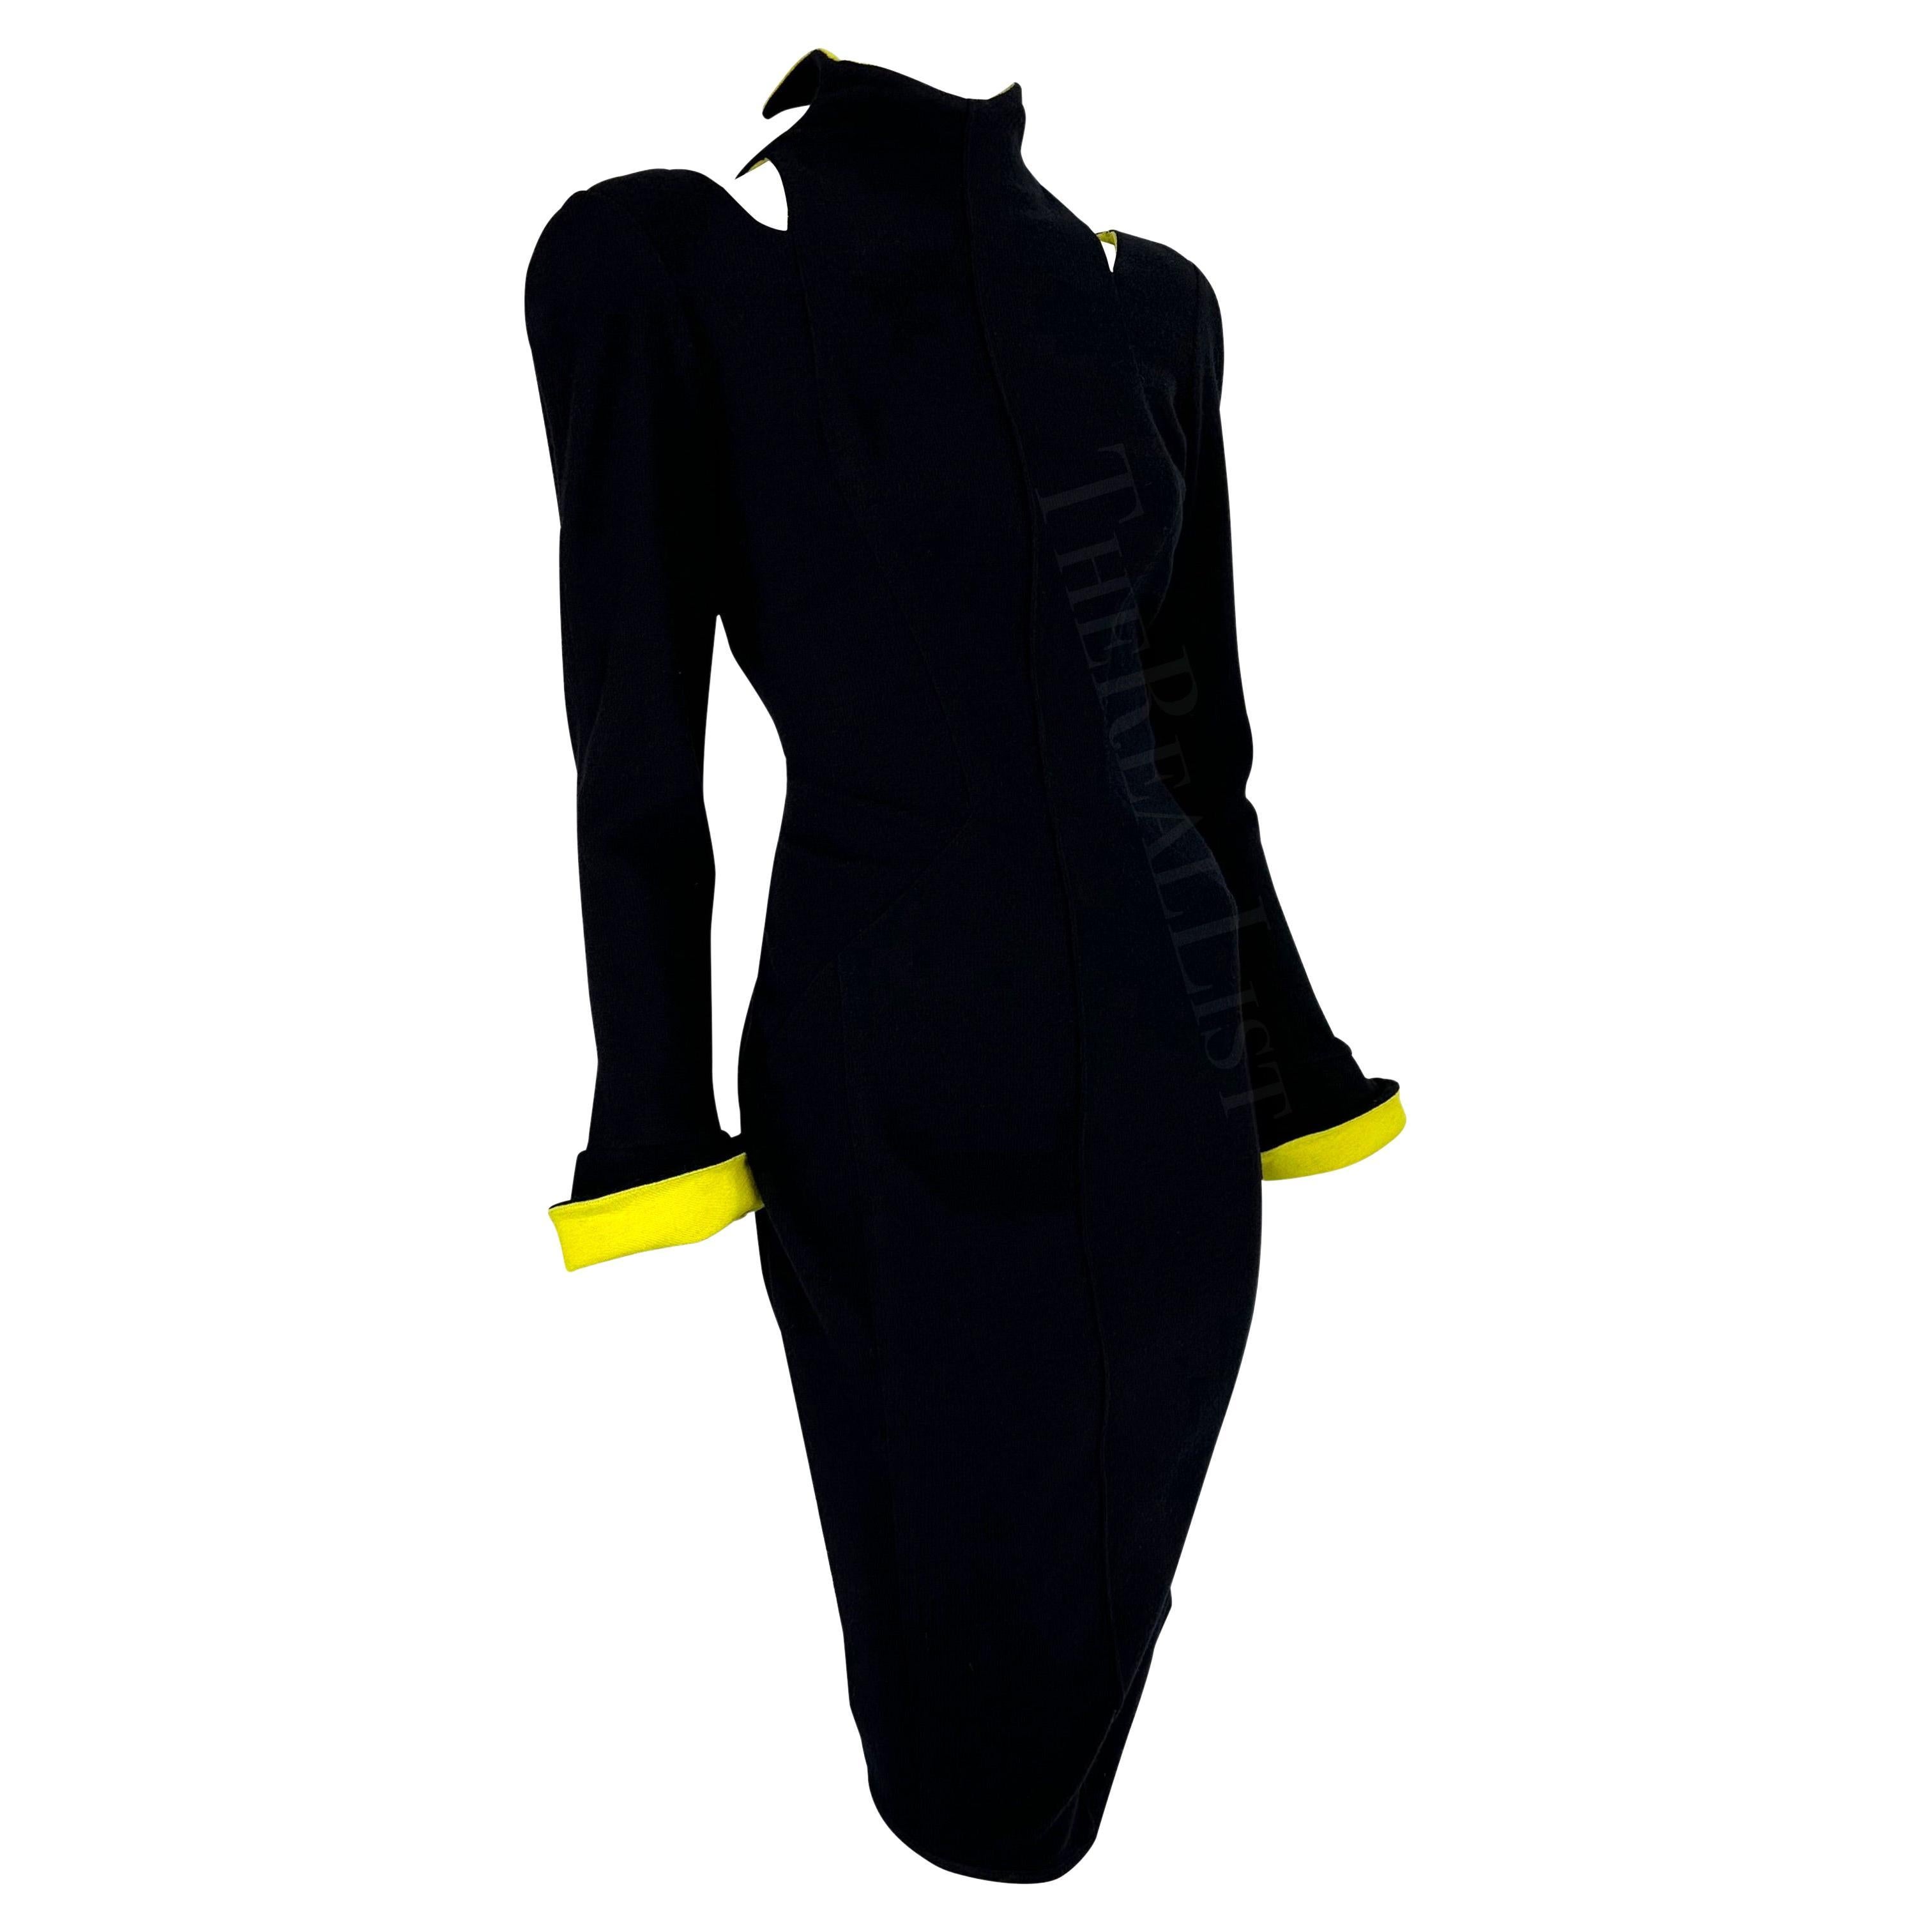 F/W 1988 Thierry Mugler Runway Les Infernales Black Yellow Cut Out Dress